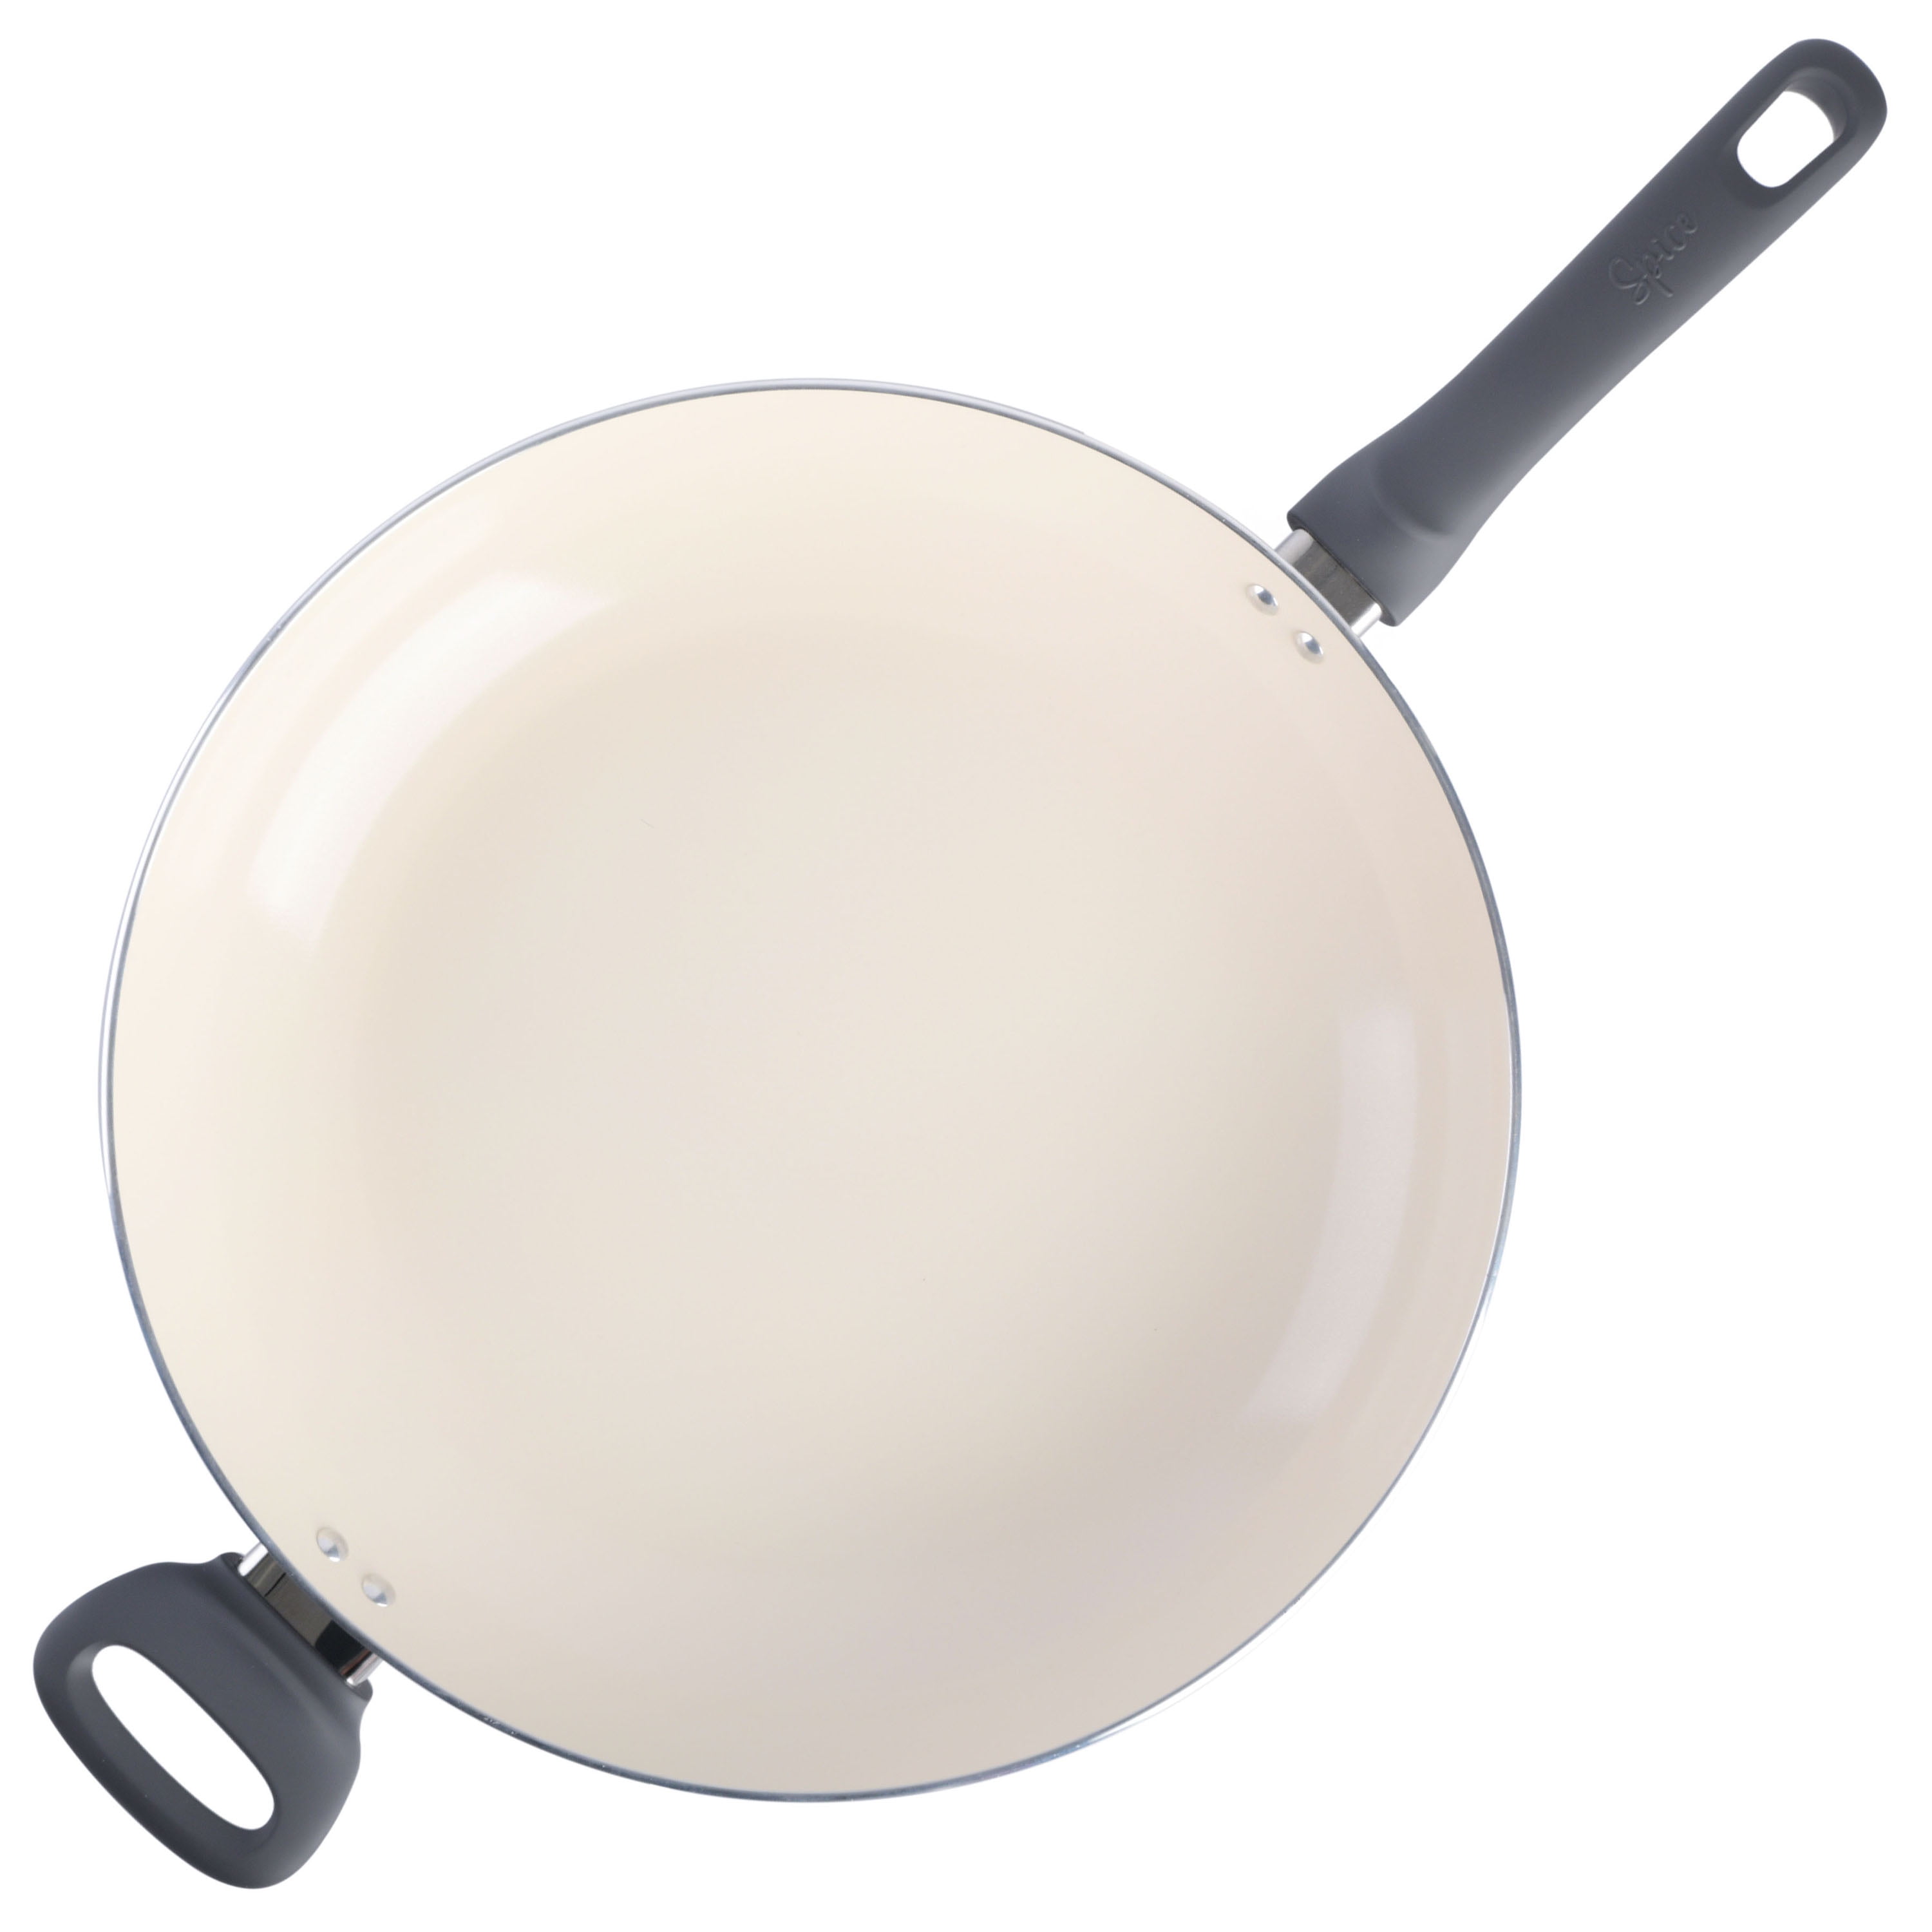 14 inch Non-Stick Frying Pan with Lid Ceramic Cookware Large Skillet  Kitchen New